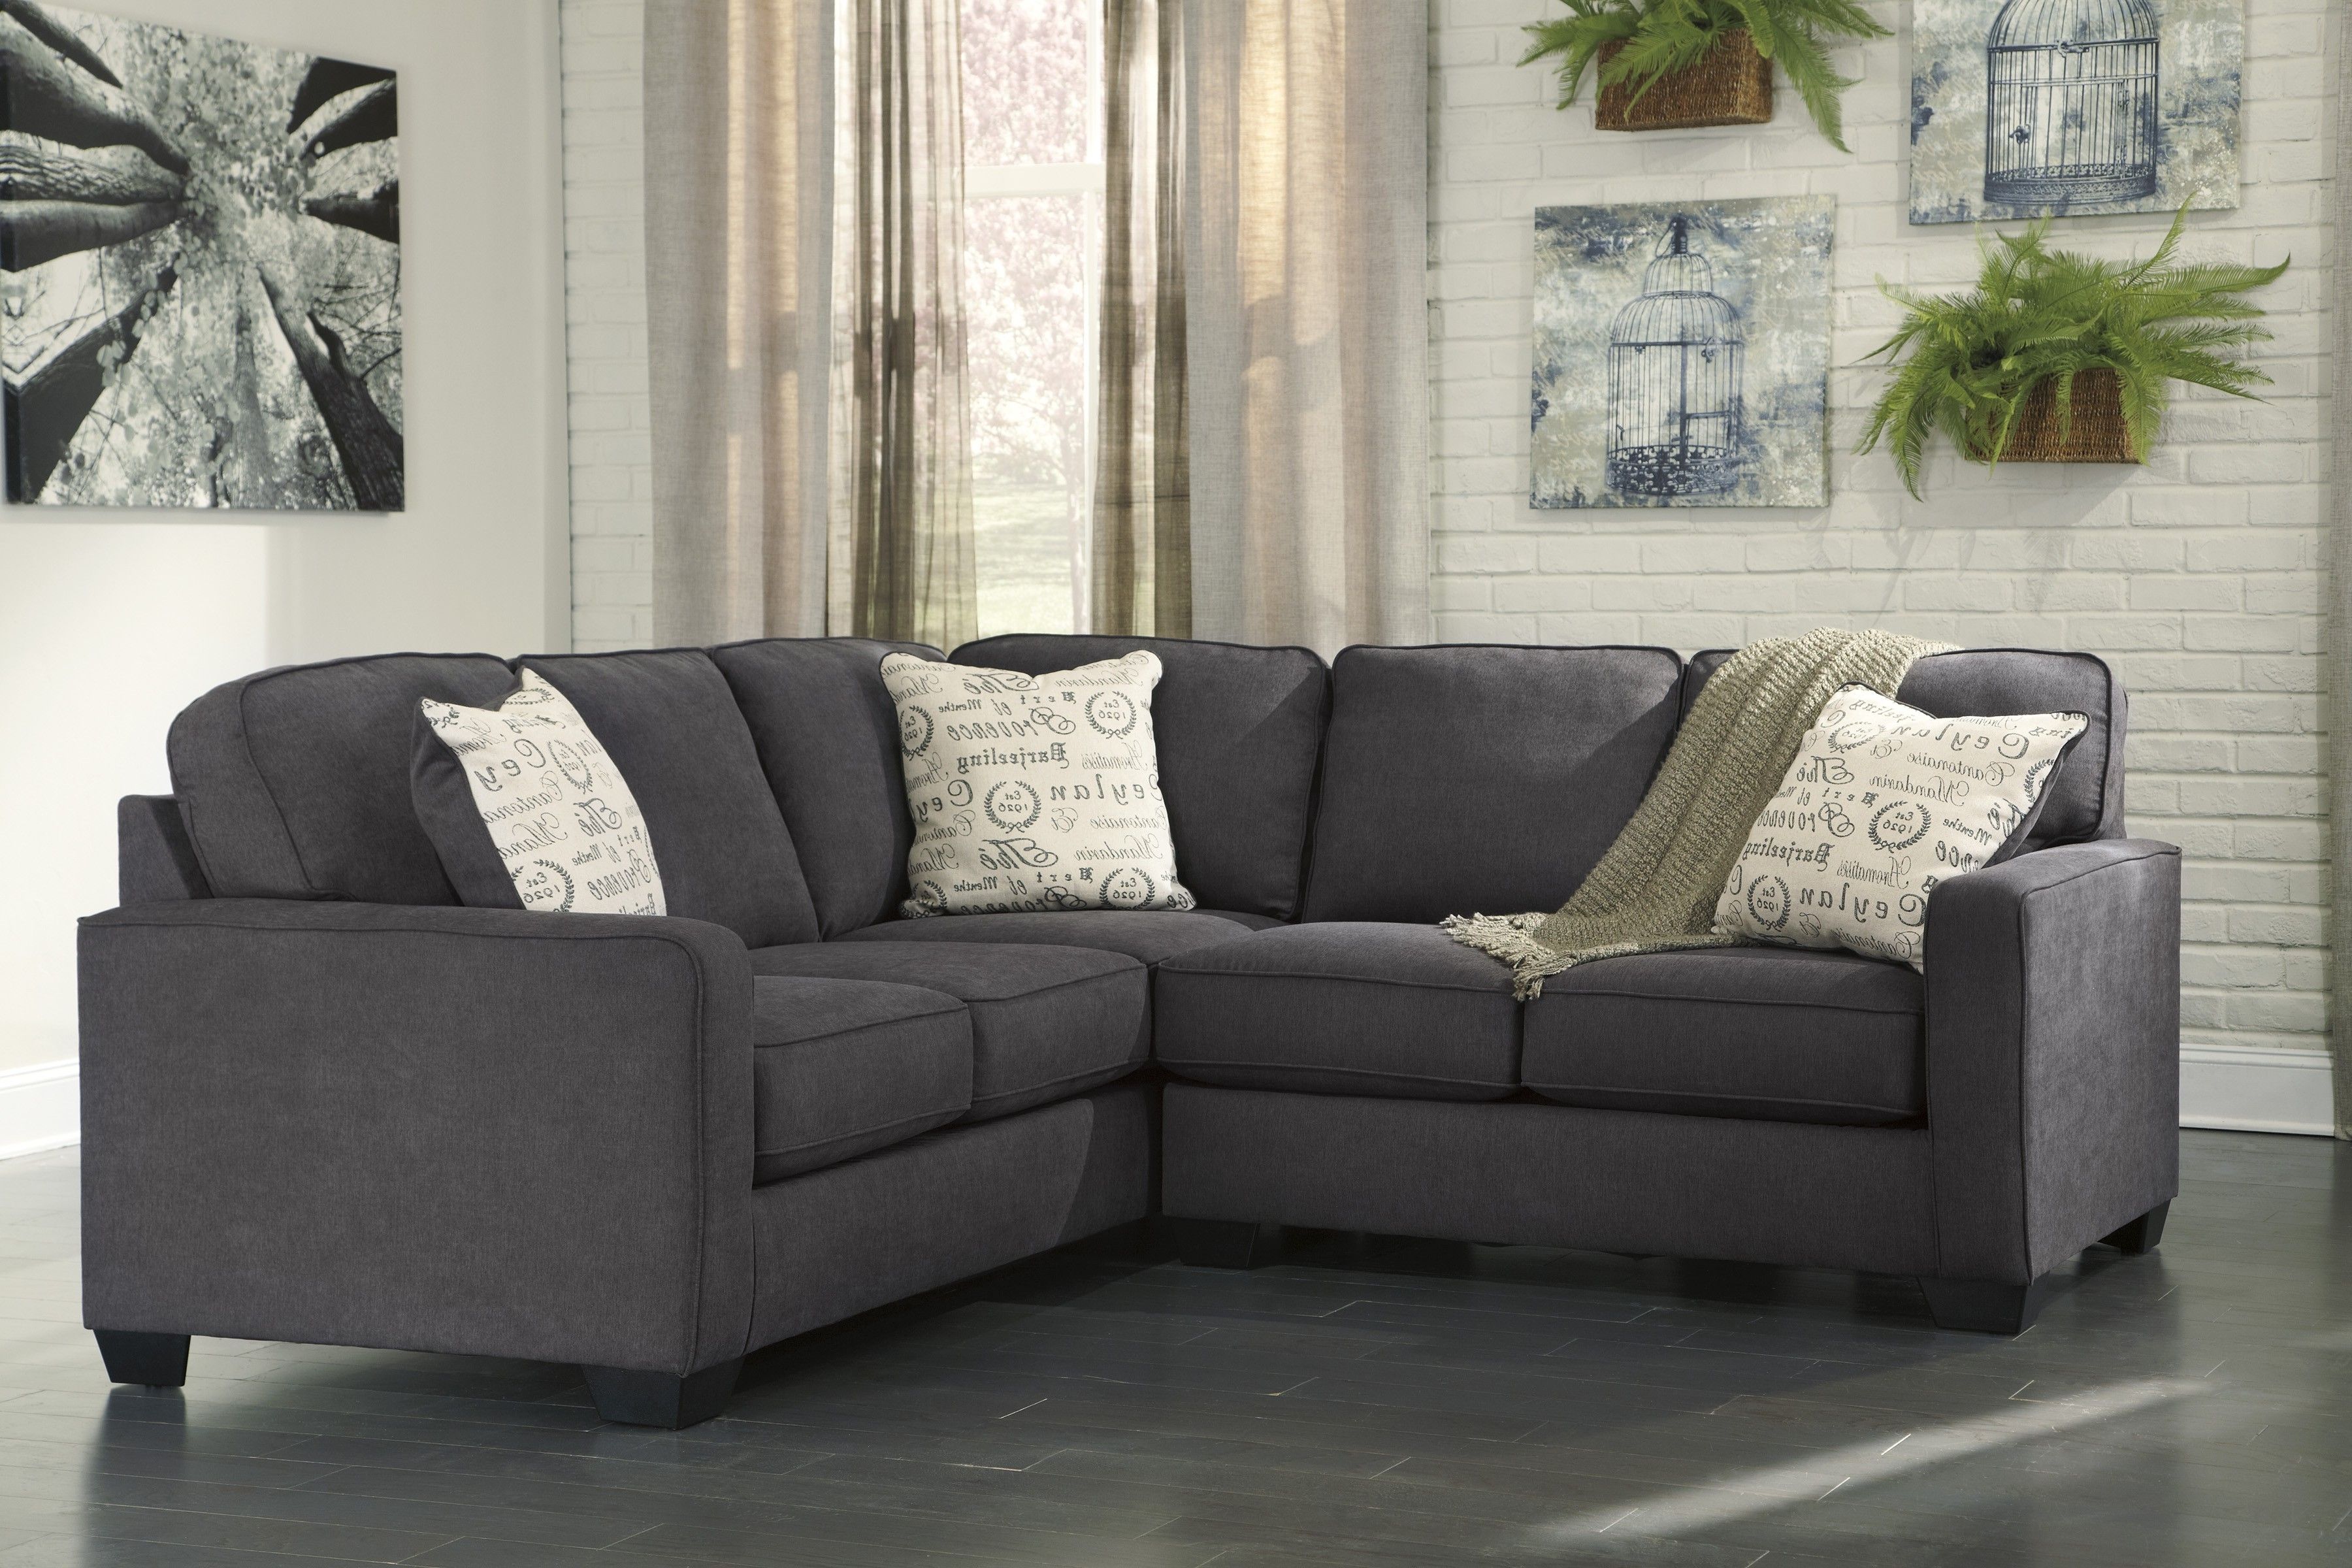 Alenya Charcoal 2 Piece Sectional Sofa For $625.00 – Furnitureusa Pertaining To 2017 Elk Grove Ca Sectional Sofas (Photo 2 of 15)